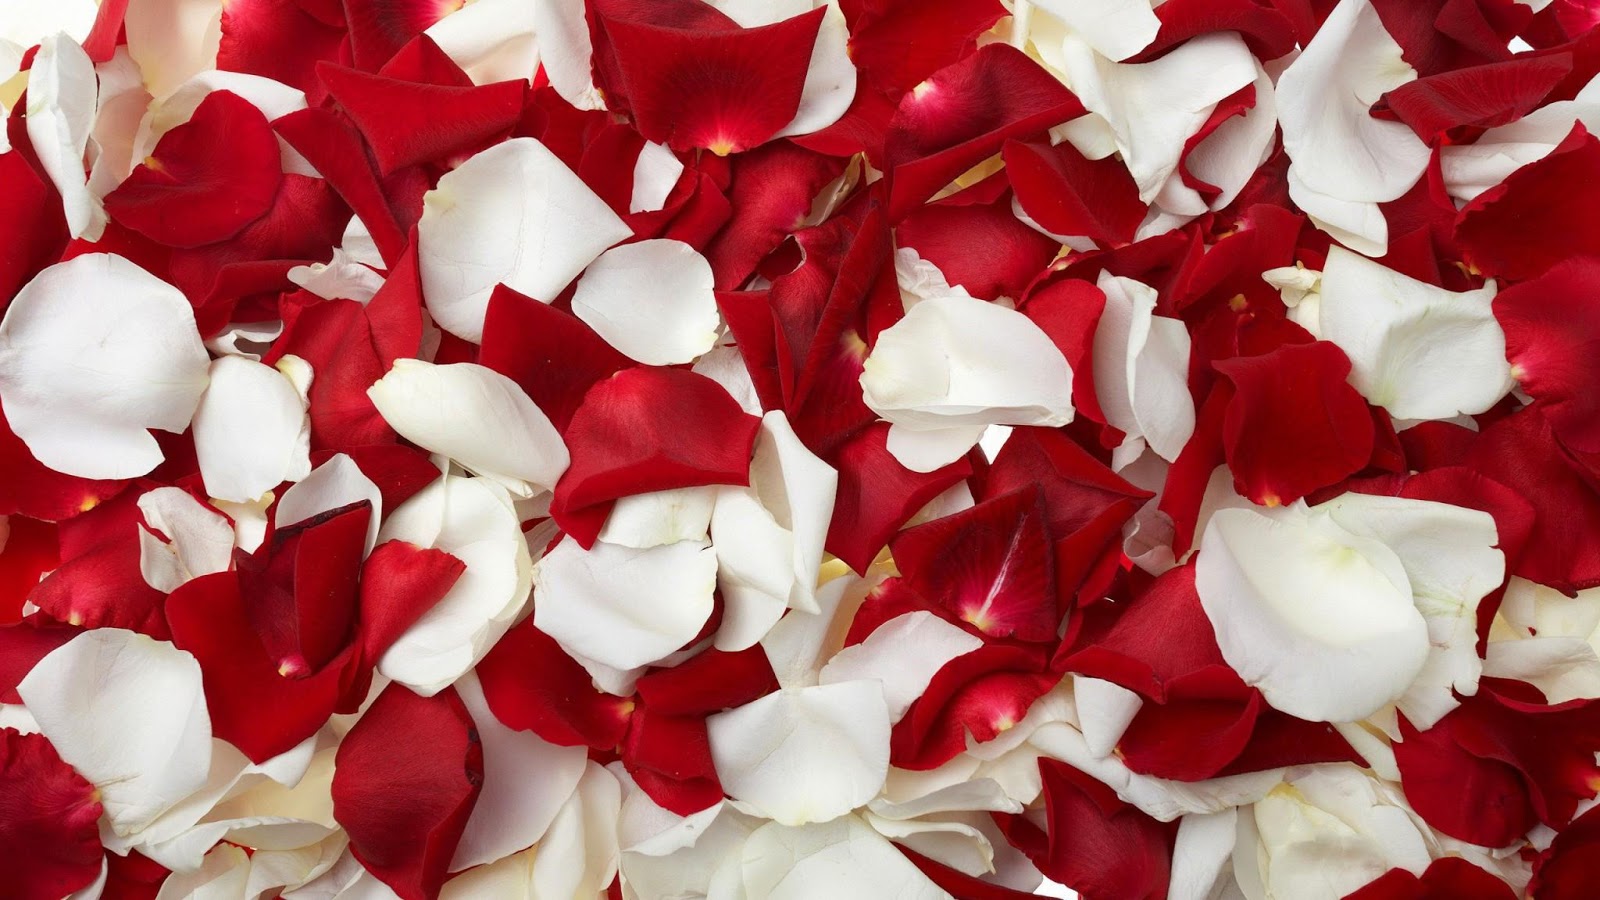 Red Rose Petals And Flowers Wallpaper - Rose Petals Wallpaper Hd , HD Wallpaper & Backgrounds